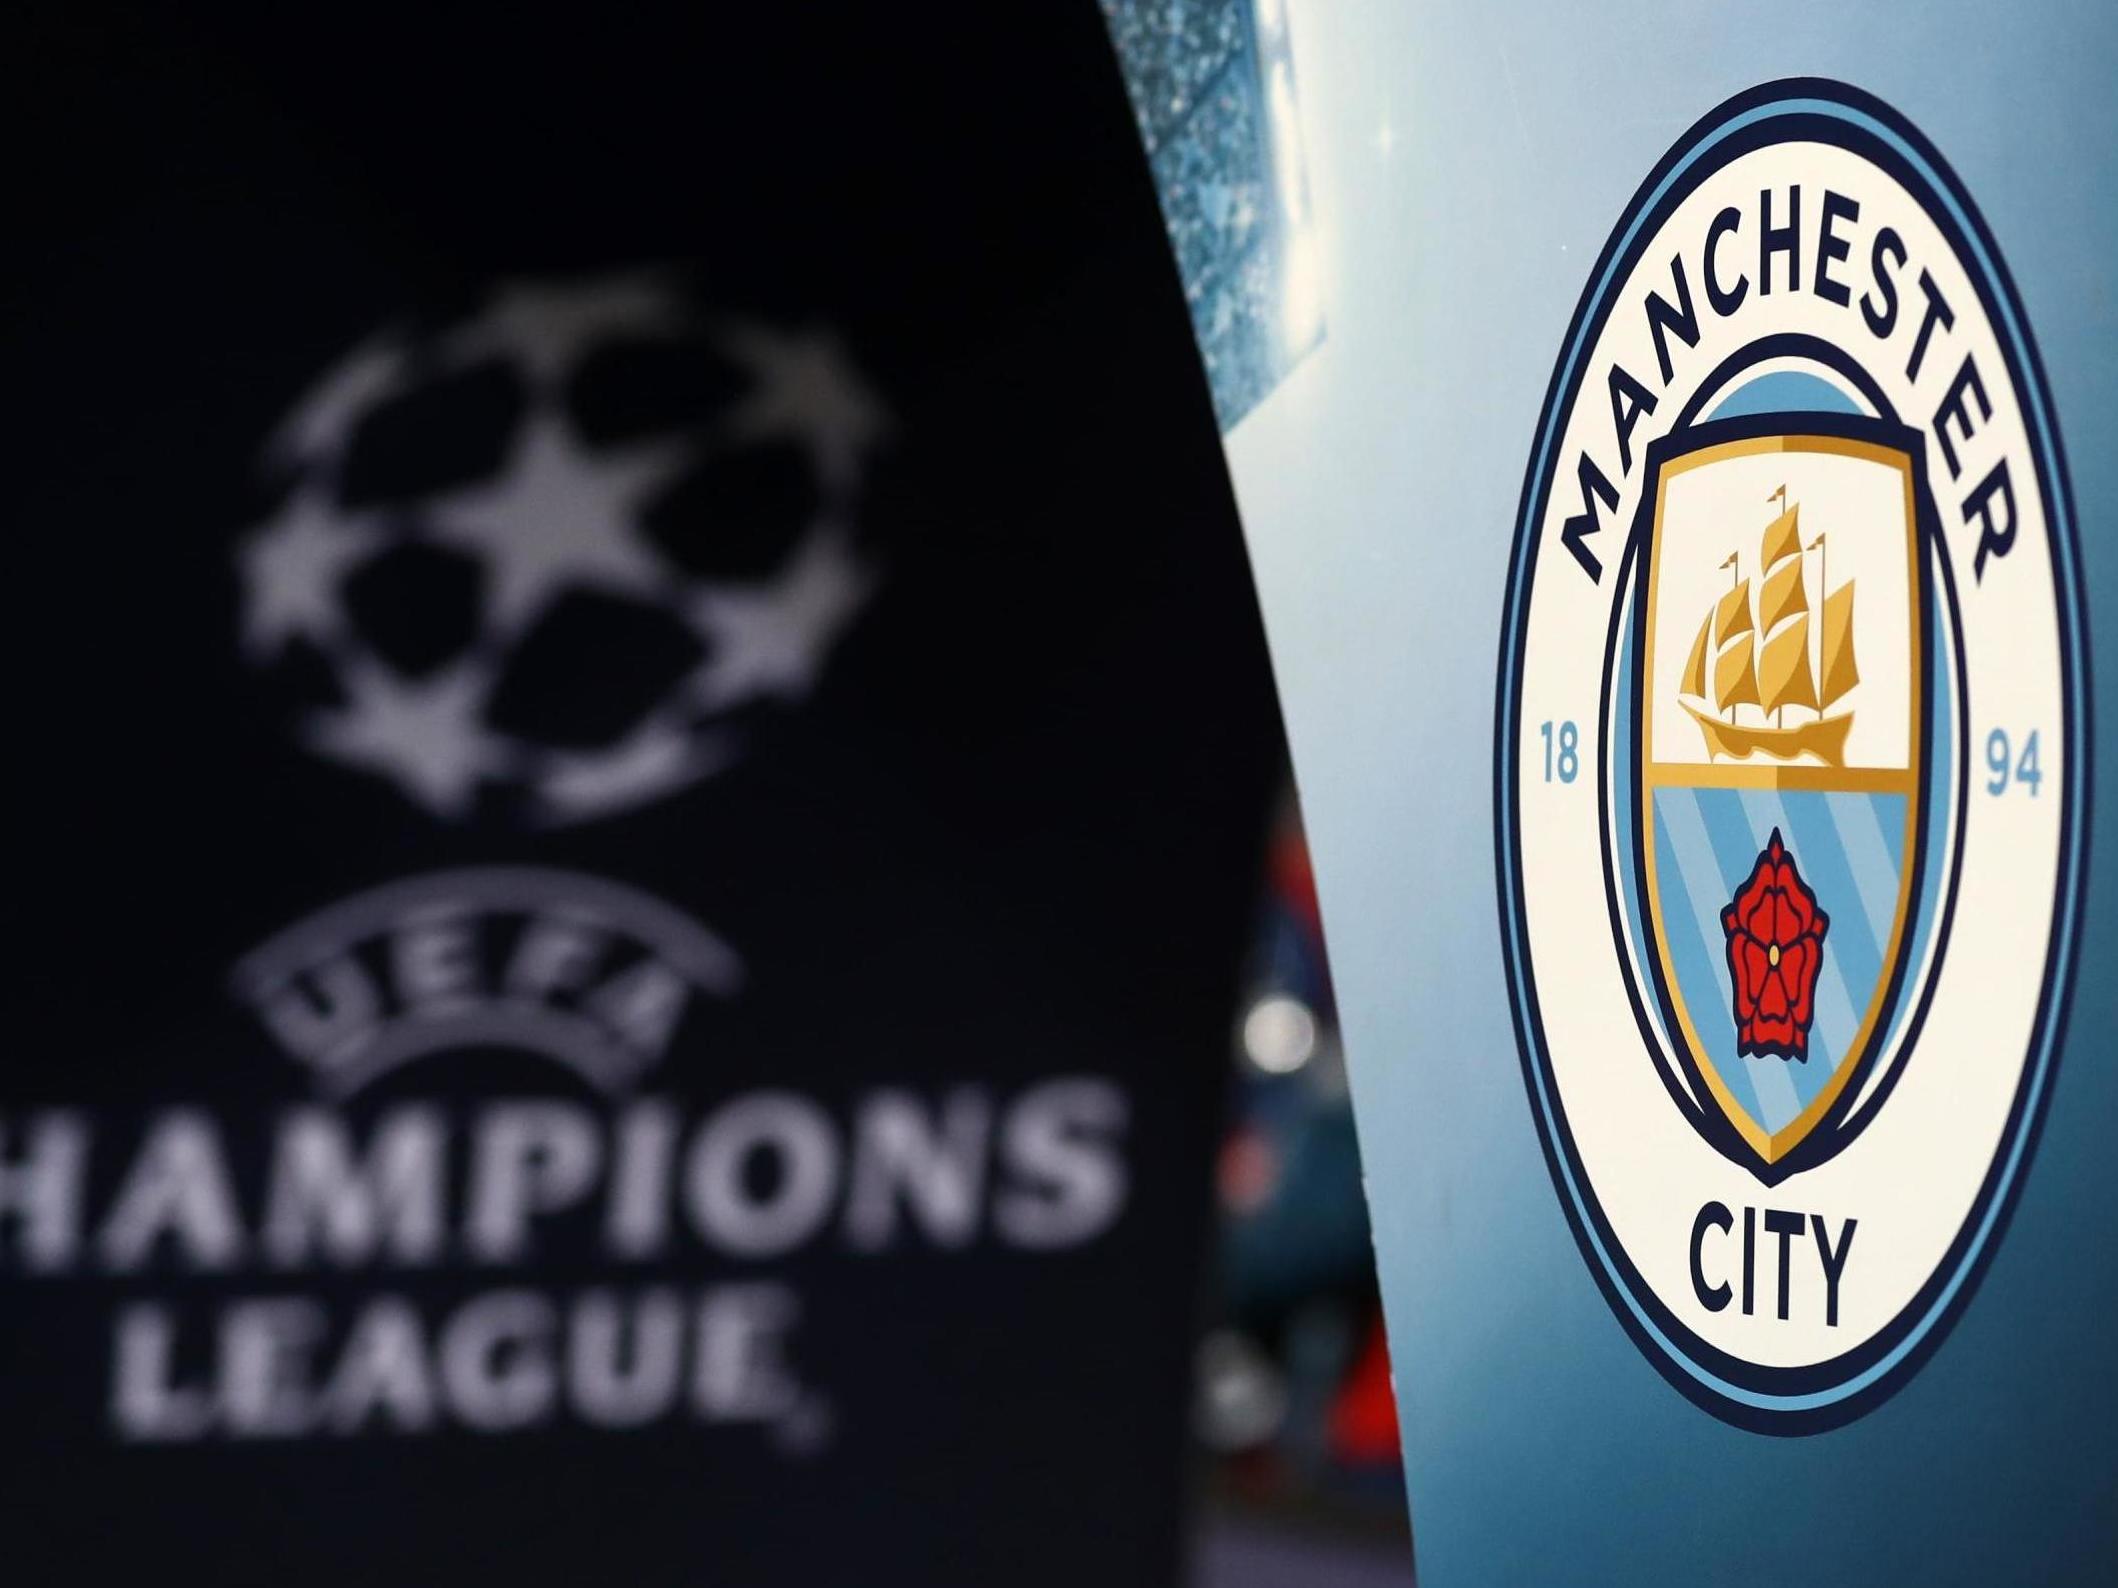 Manchester City have been banned from the Champions League